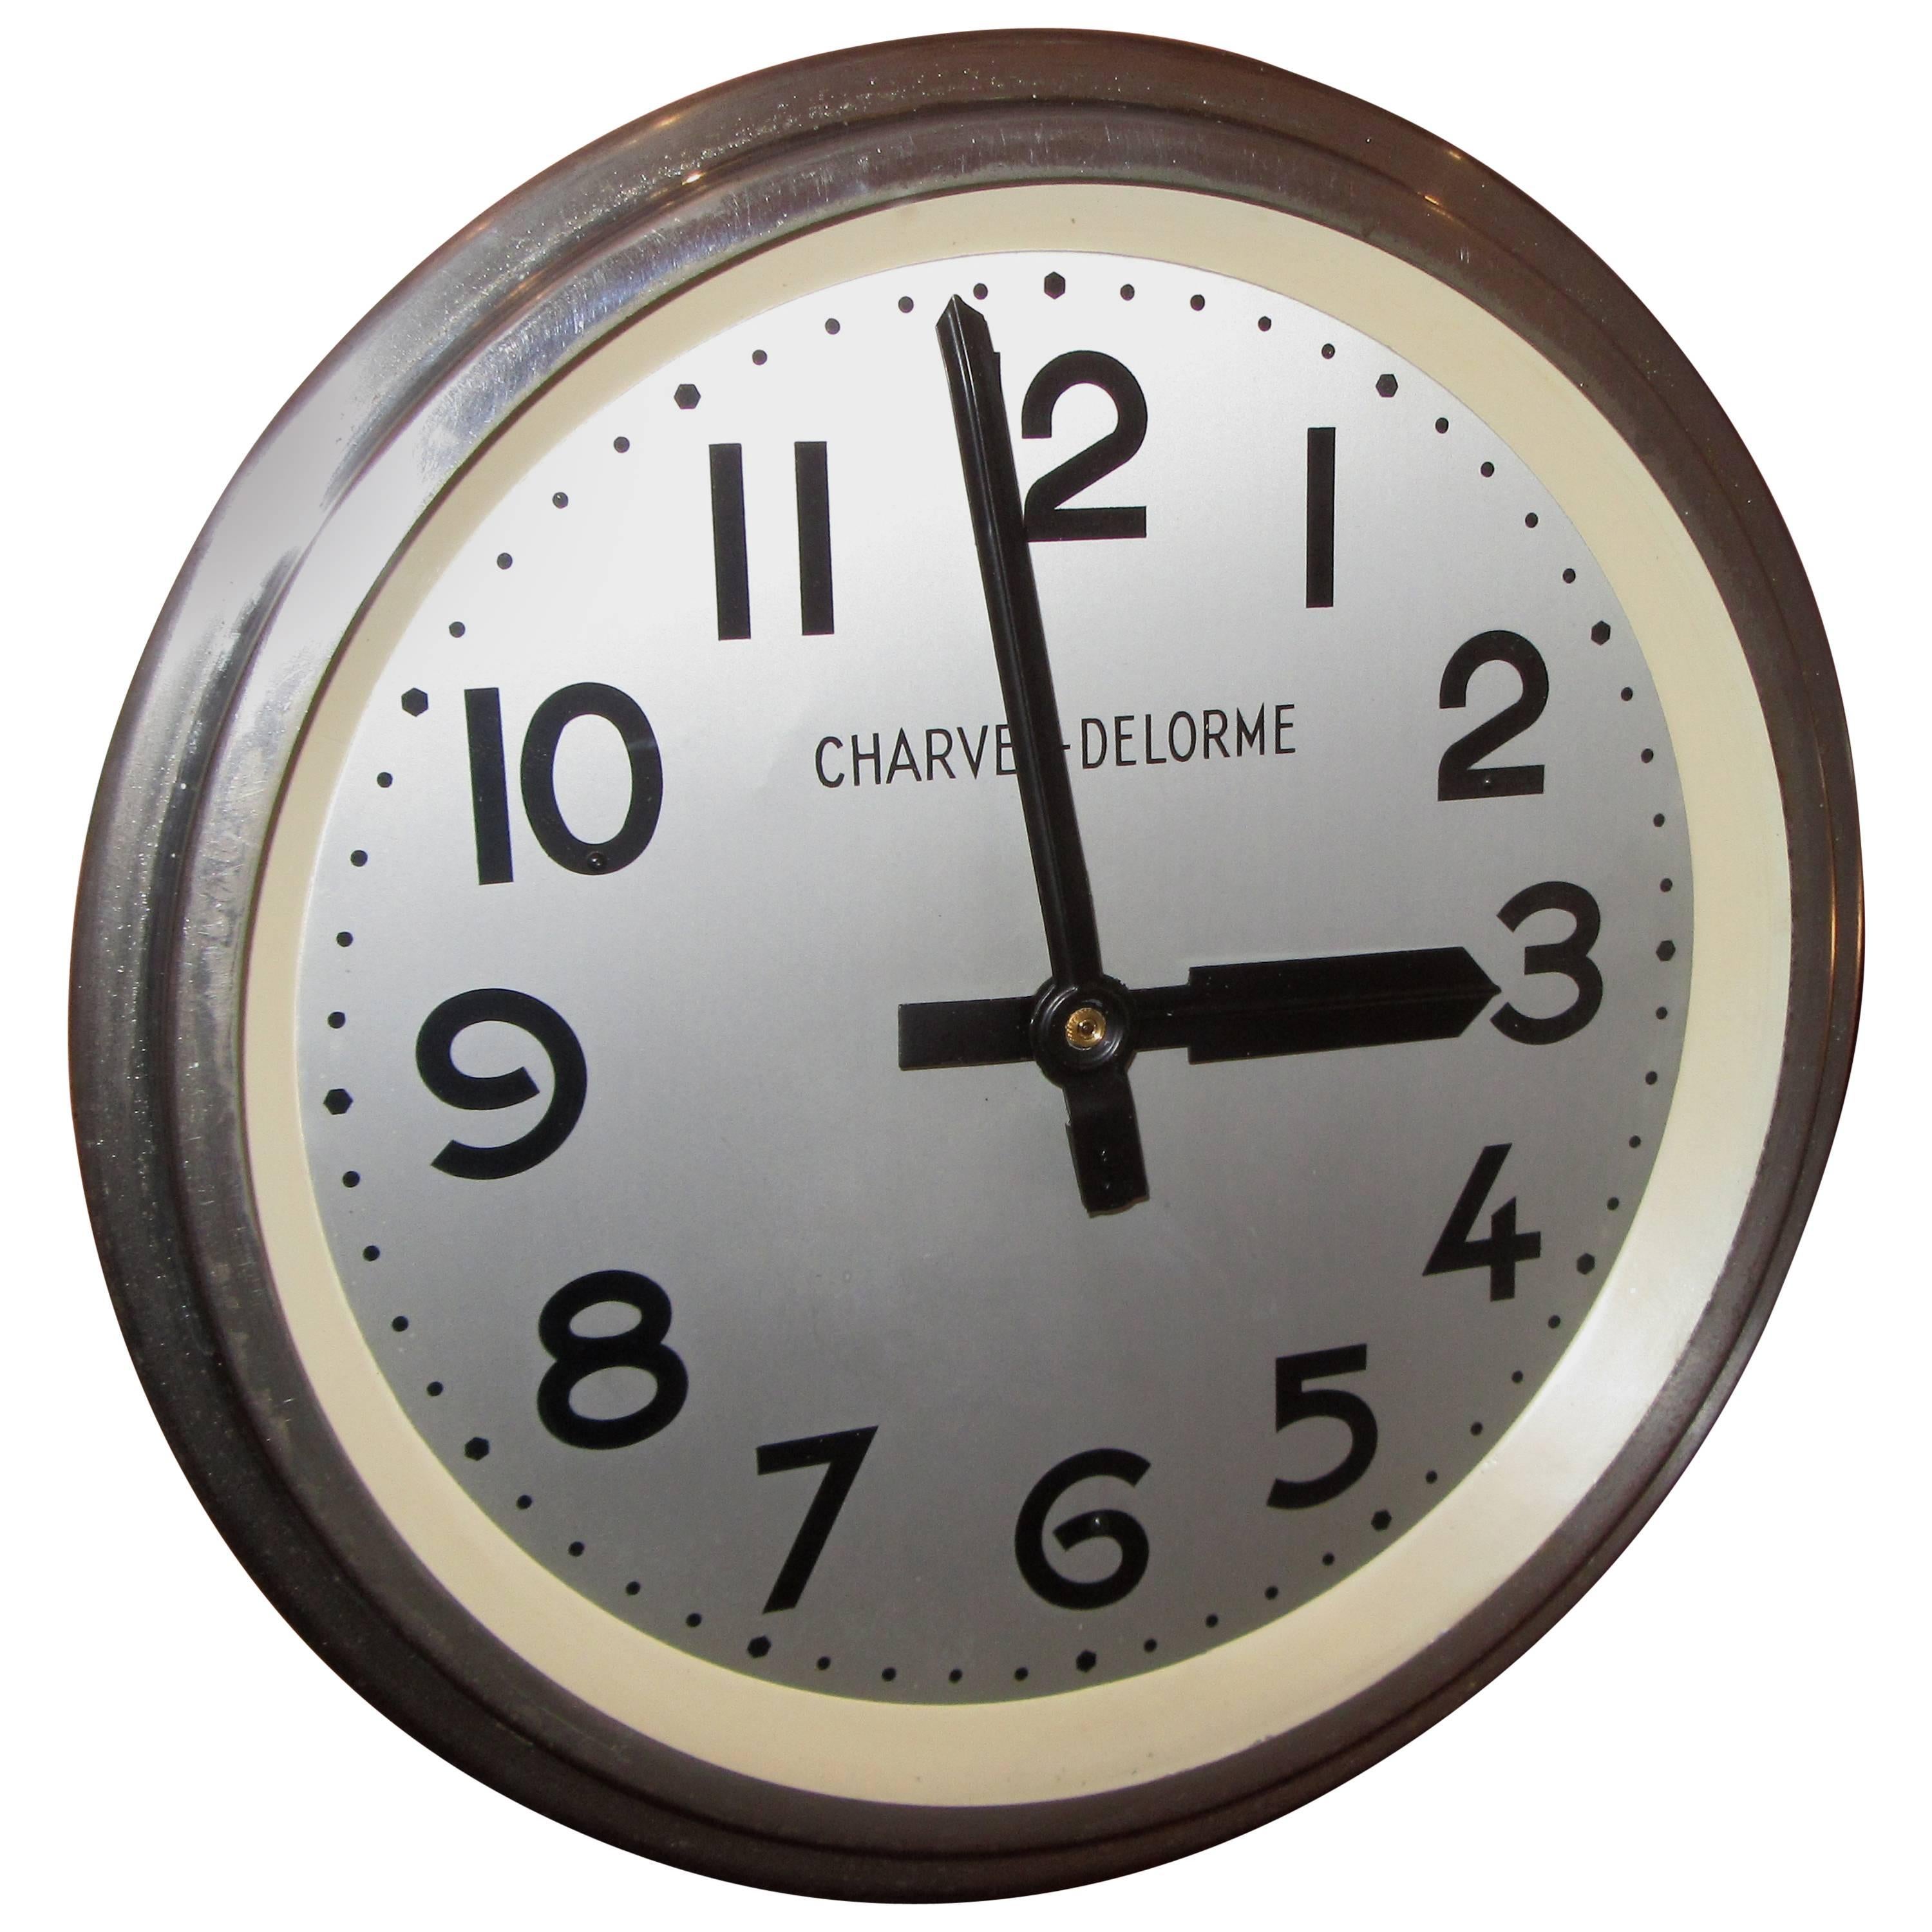 Midcentury French Industrial Wall Clock Produced by Charvet-Delorme of Lyon